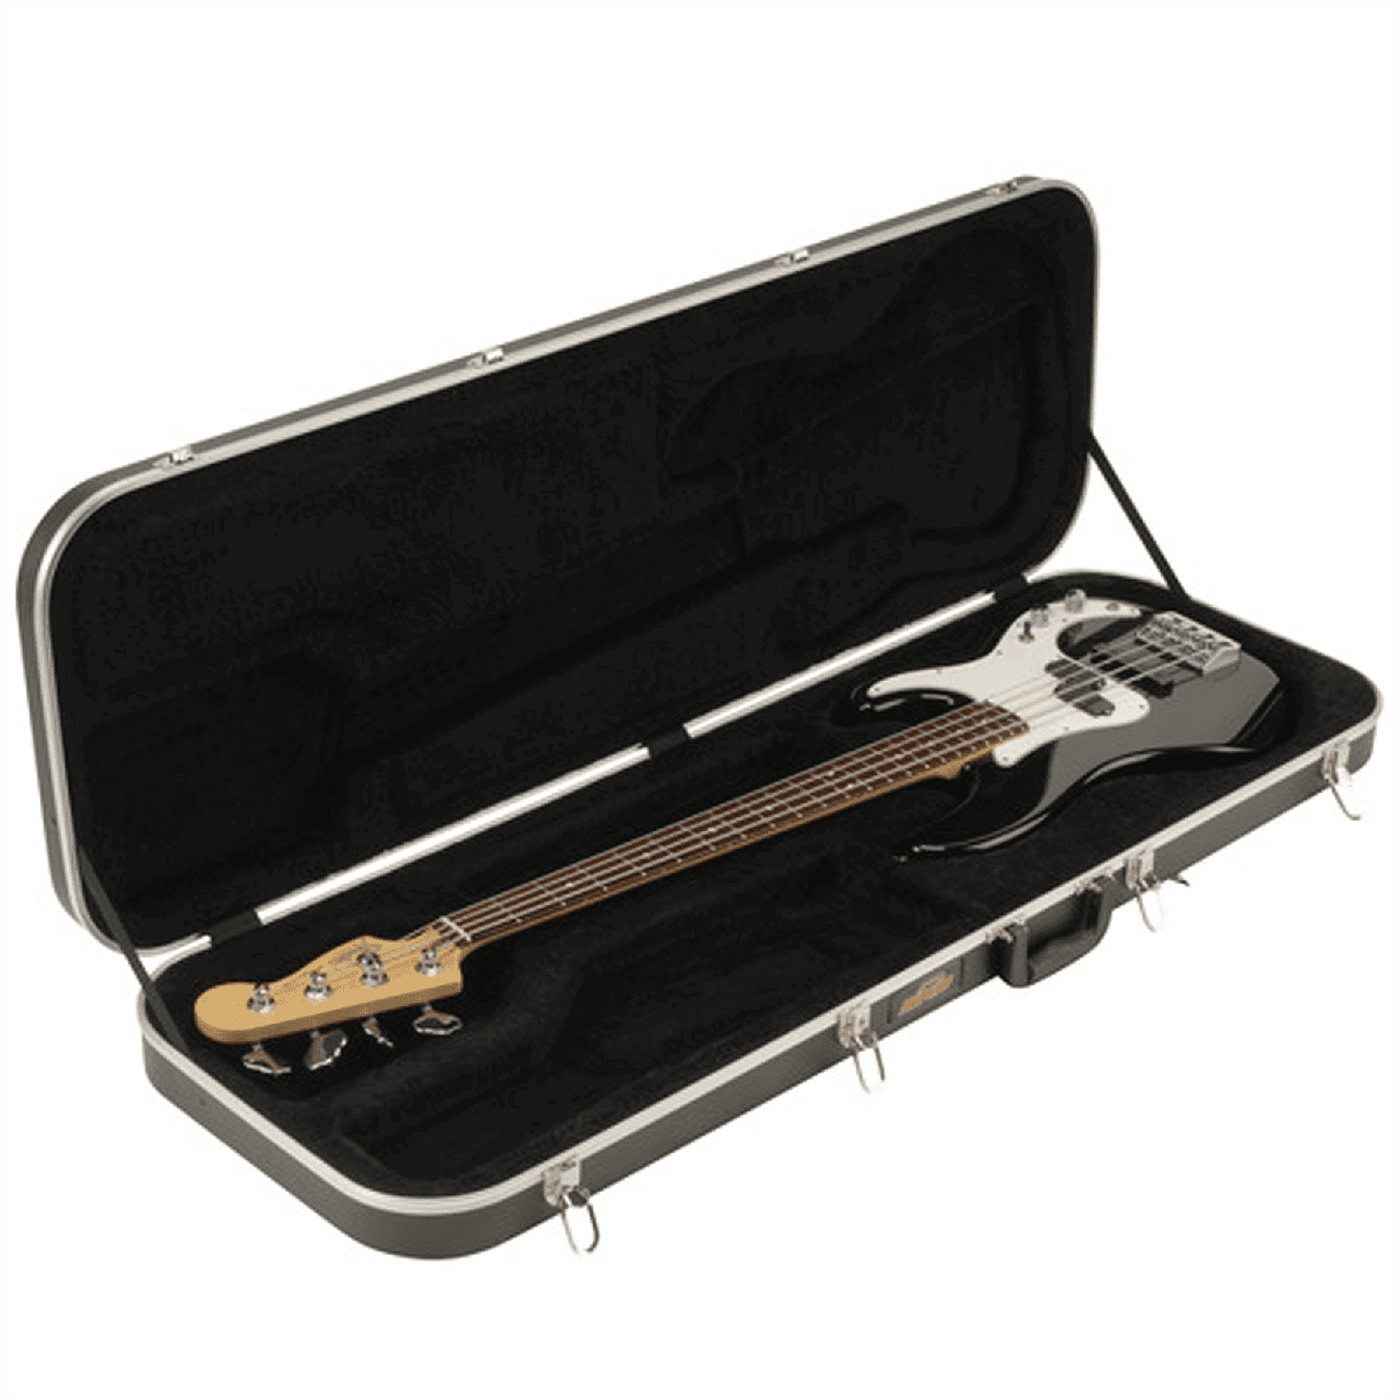 SKB Electric Bass Hardshell - The 1SKB-4 Electric Bass Economy Rectangular Case from SKB is designed to hold a variety of right-handed solid-body basses. It features molded-in bumper protection, and SKB's deluxe EPS plush lined molded interior, which is d